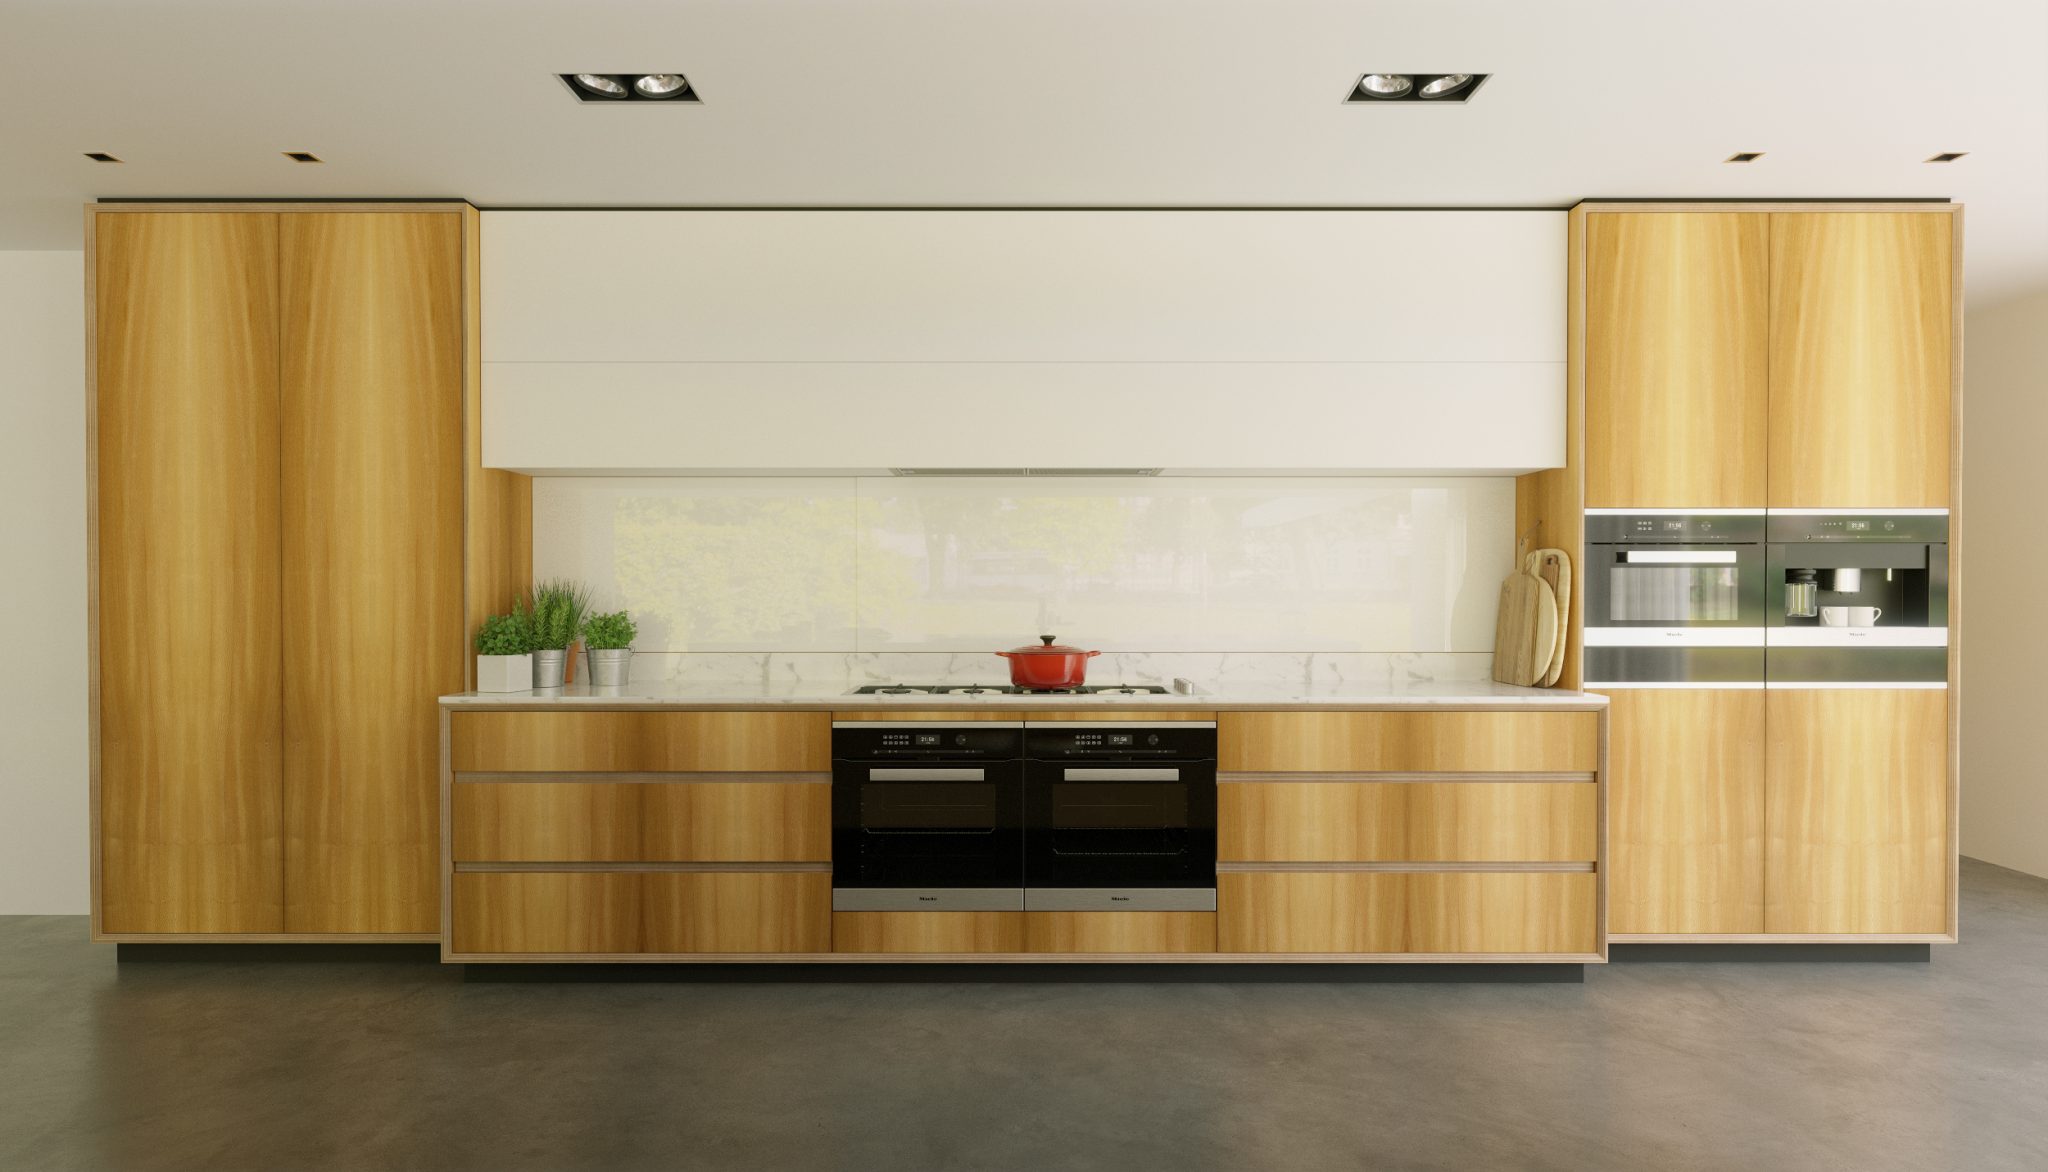 The Plywood Kitchen Company – Transforming spaces through designing and